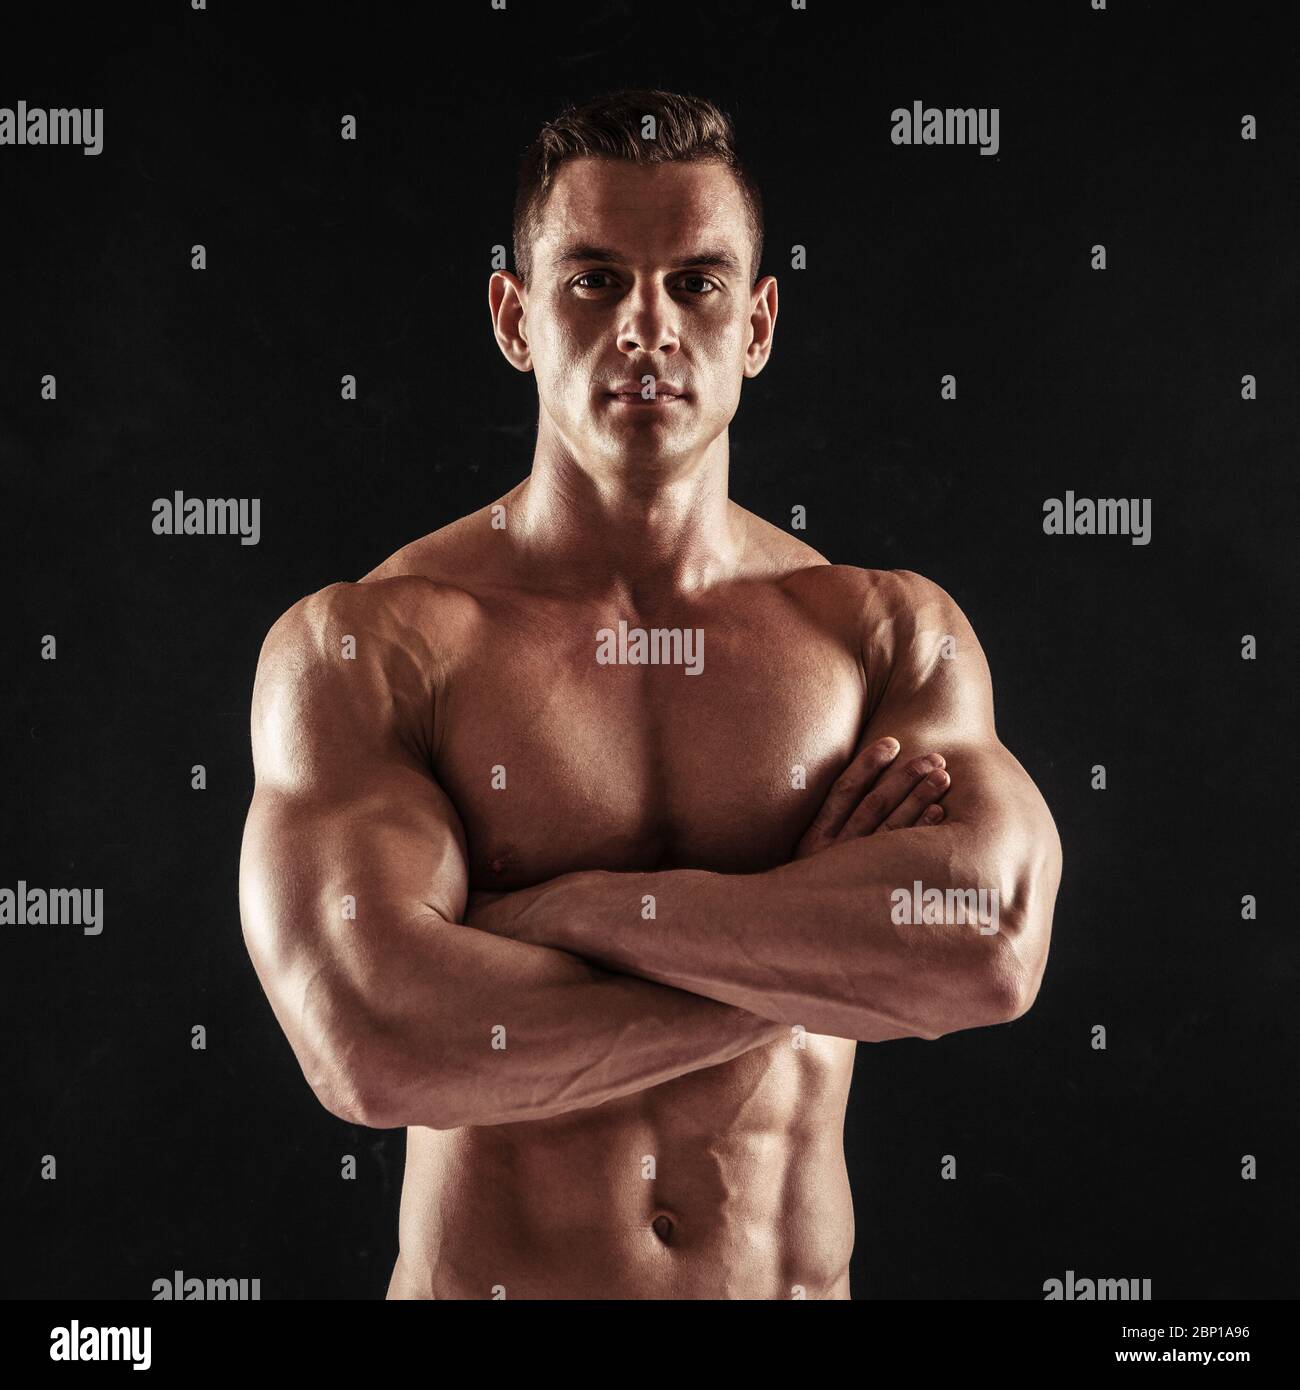 Fitness in gym, sport and healthy lifestyle concept. Handsome athletic man showing his trained body on dark background. Bodybuilder male model Stock Photo